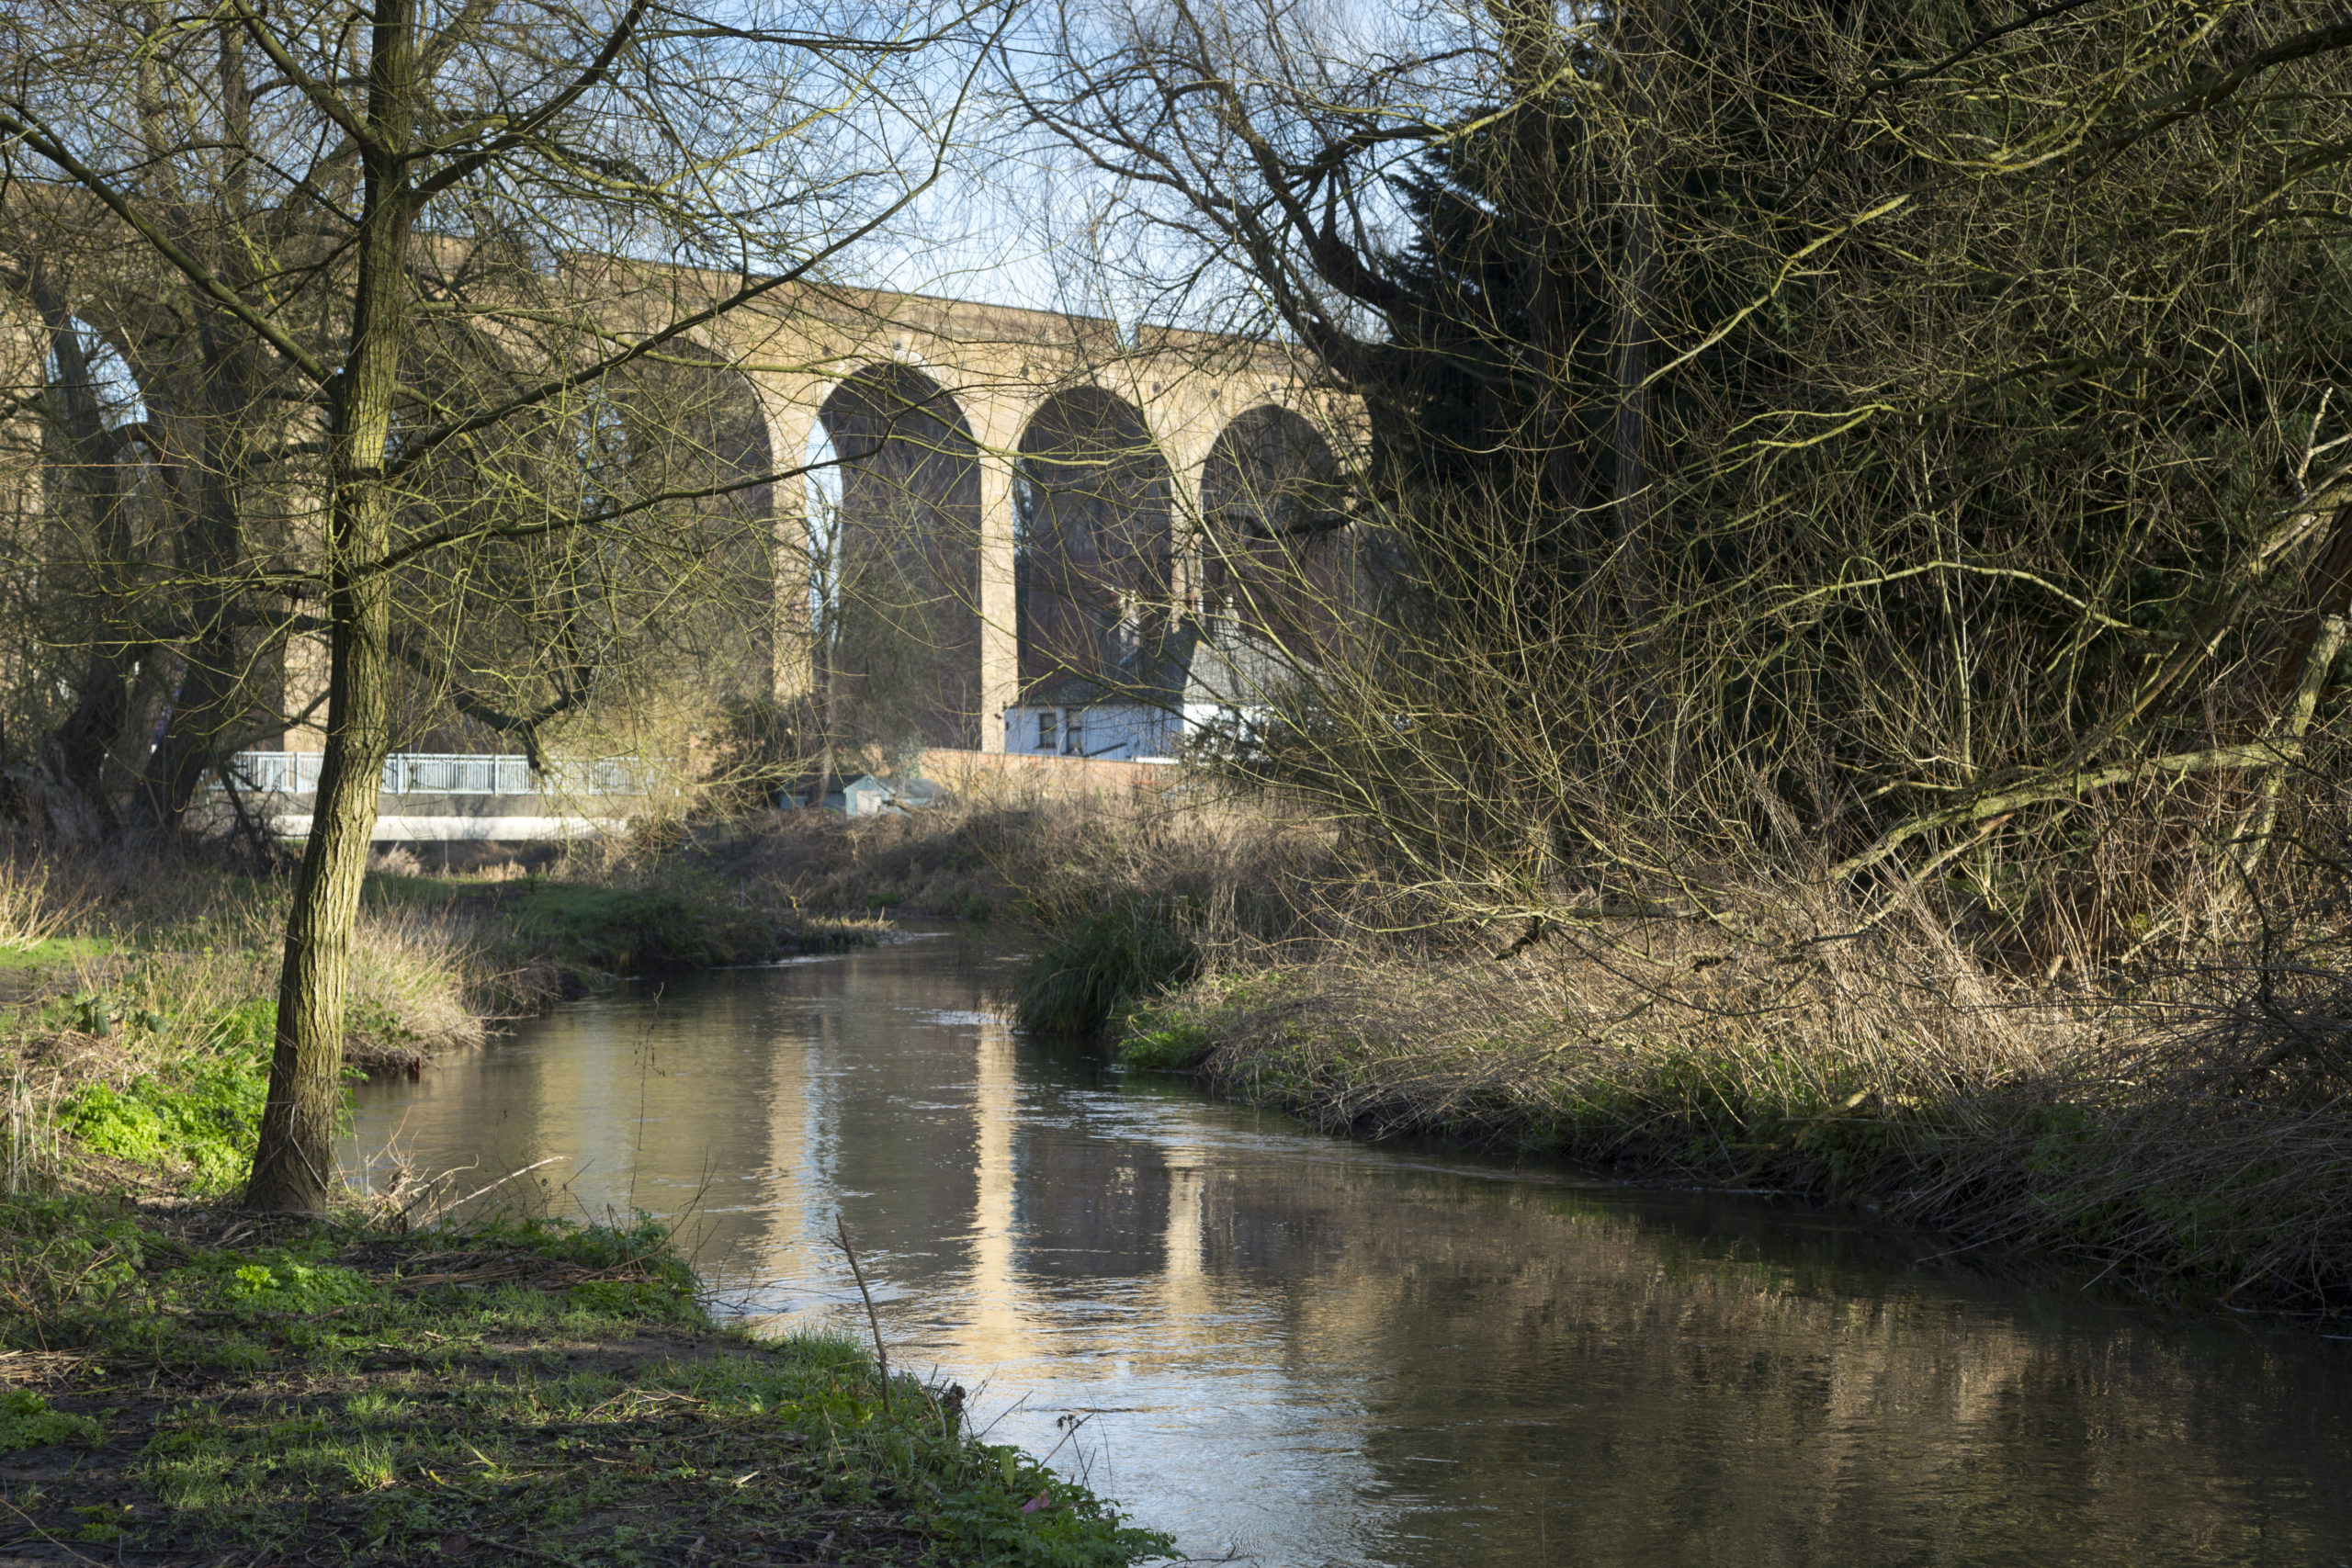 Viaduct with the River Darent underneath